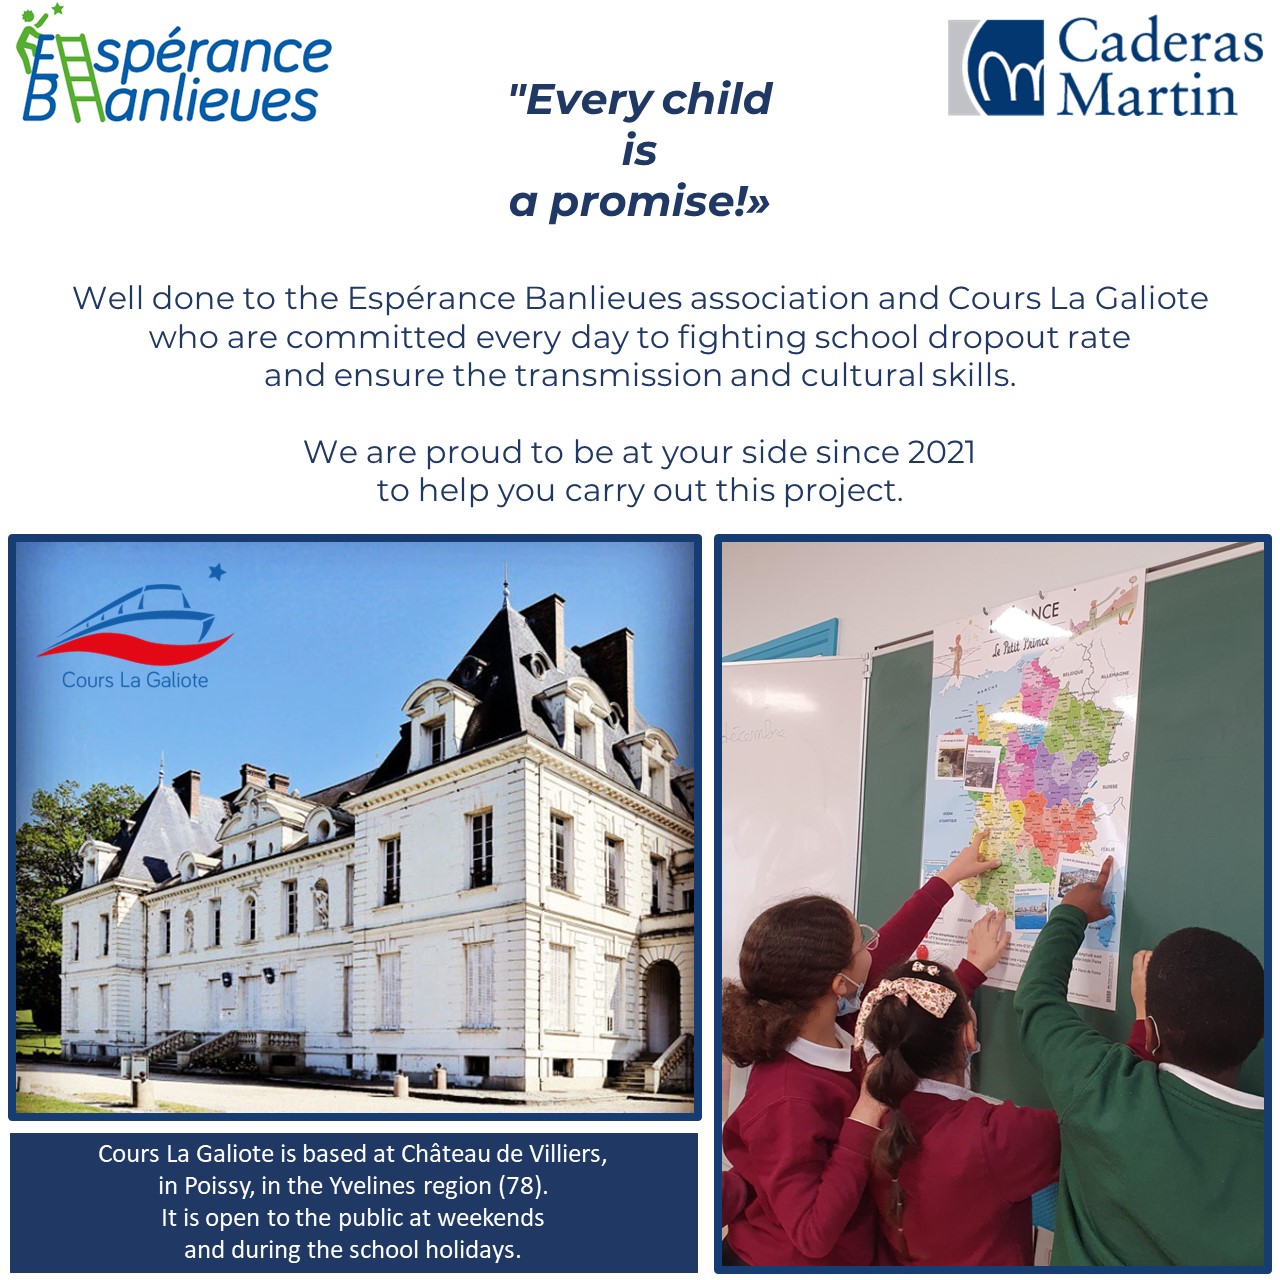 Esperance Banlieues association: Caderas Martin has renewed its support for Cours La Galiote since 2021.